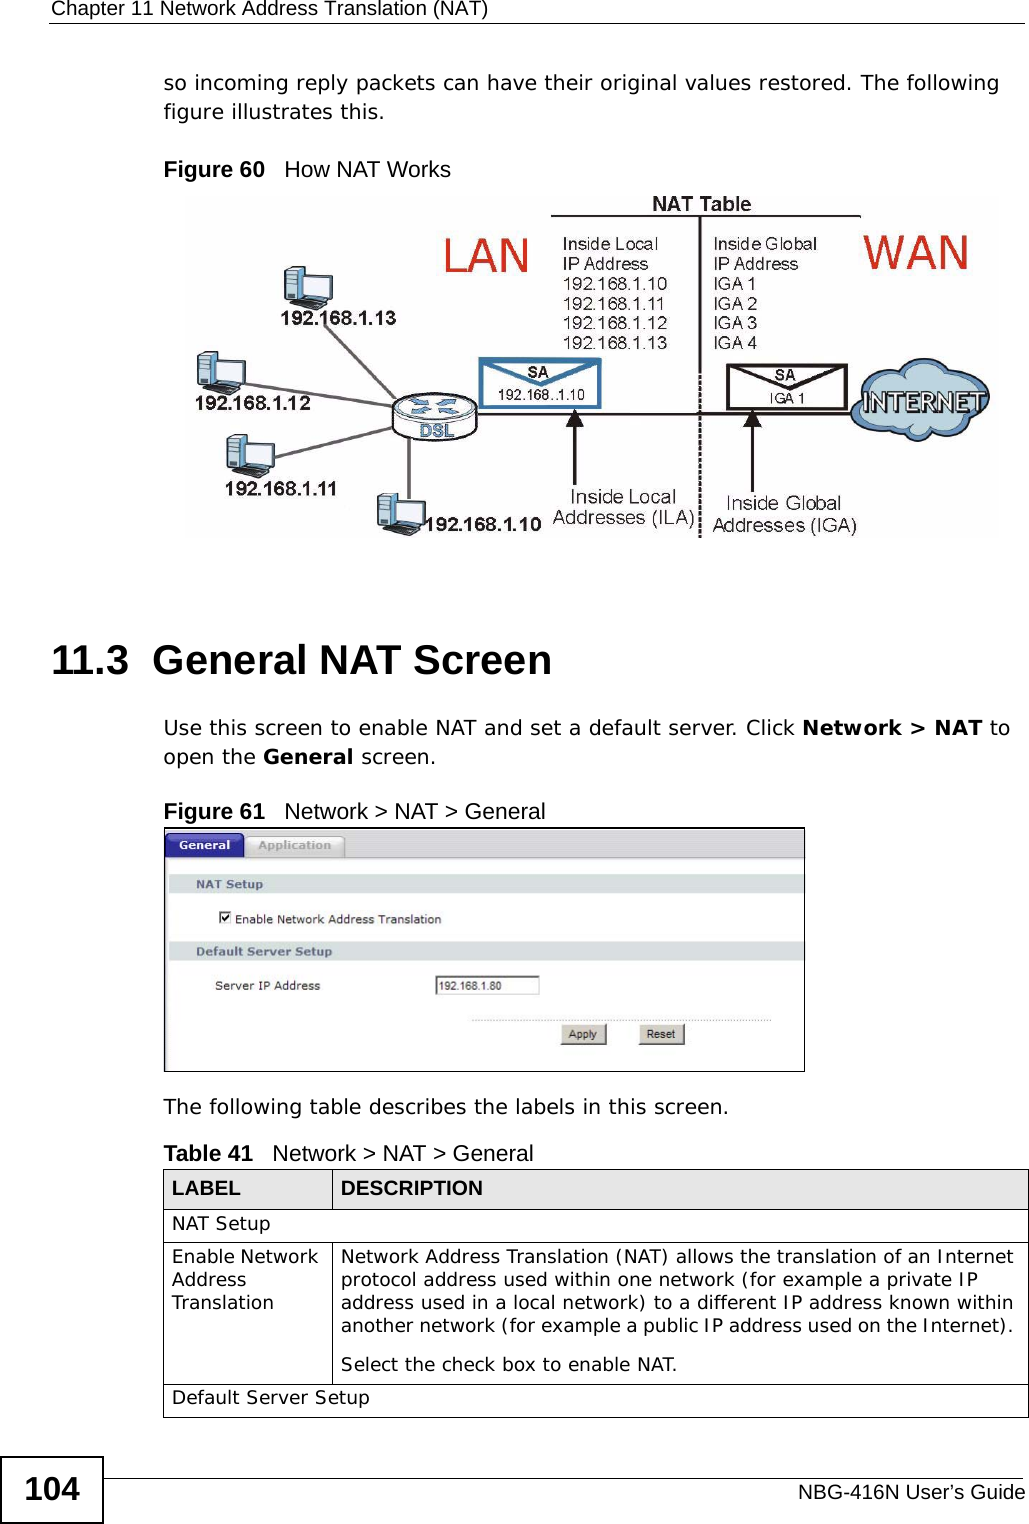 Chapter 11 Network Address Translation (NAT)NBG-416N User’s Guide104so incoming reply packets can have their original values restored. The following figure illustrates this.Figure 60   How NAT Works11.3  General NAT ScreenUse this screen to enable NAT and set a default server. Click Network &gt; NAT to open the General screen.Figure 61   Network &gt; NAT &gt; General The following table describes the labels in this screen.Table 41   Network &gt; NAT &gt; GeneralLABEL DESCRIPTIONNAT SetupEnable Network Address TranslationNetwork Address Translation (NAT) allows the translation of an Internet protocol address used within one network (for example a private IP address used in a local network) to a different IP address known within another network (for example a public IP address used on the Internet). Select the check box to enable NAT.Default Server Setup